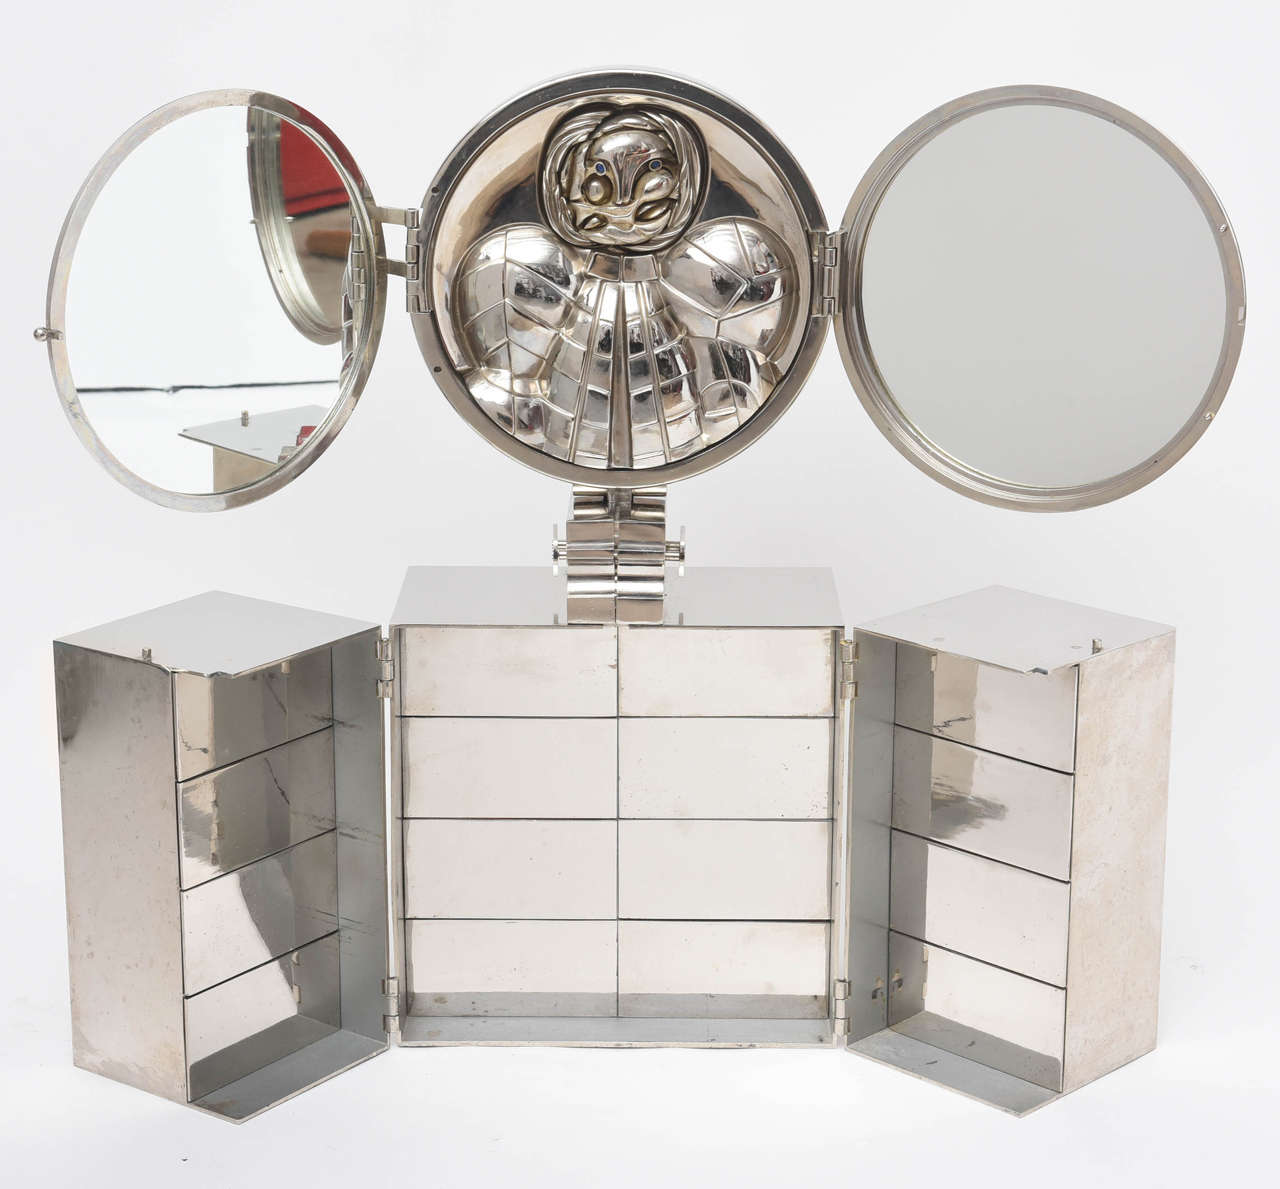 A rare design seldom seen in the market. The design folds from a minimal box into a fantastic combination of 16 felt lined drawers and hinged mirrors.
The sculpture is a homage to Paloma Picasso.
Less than 85 were produced.